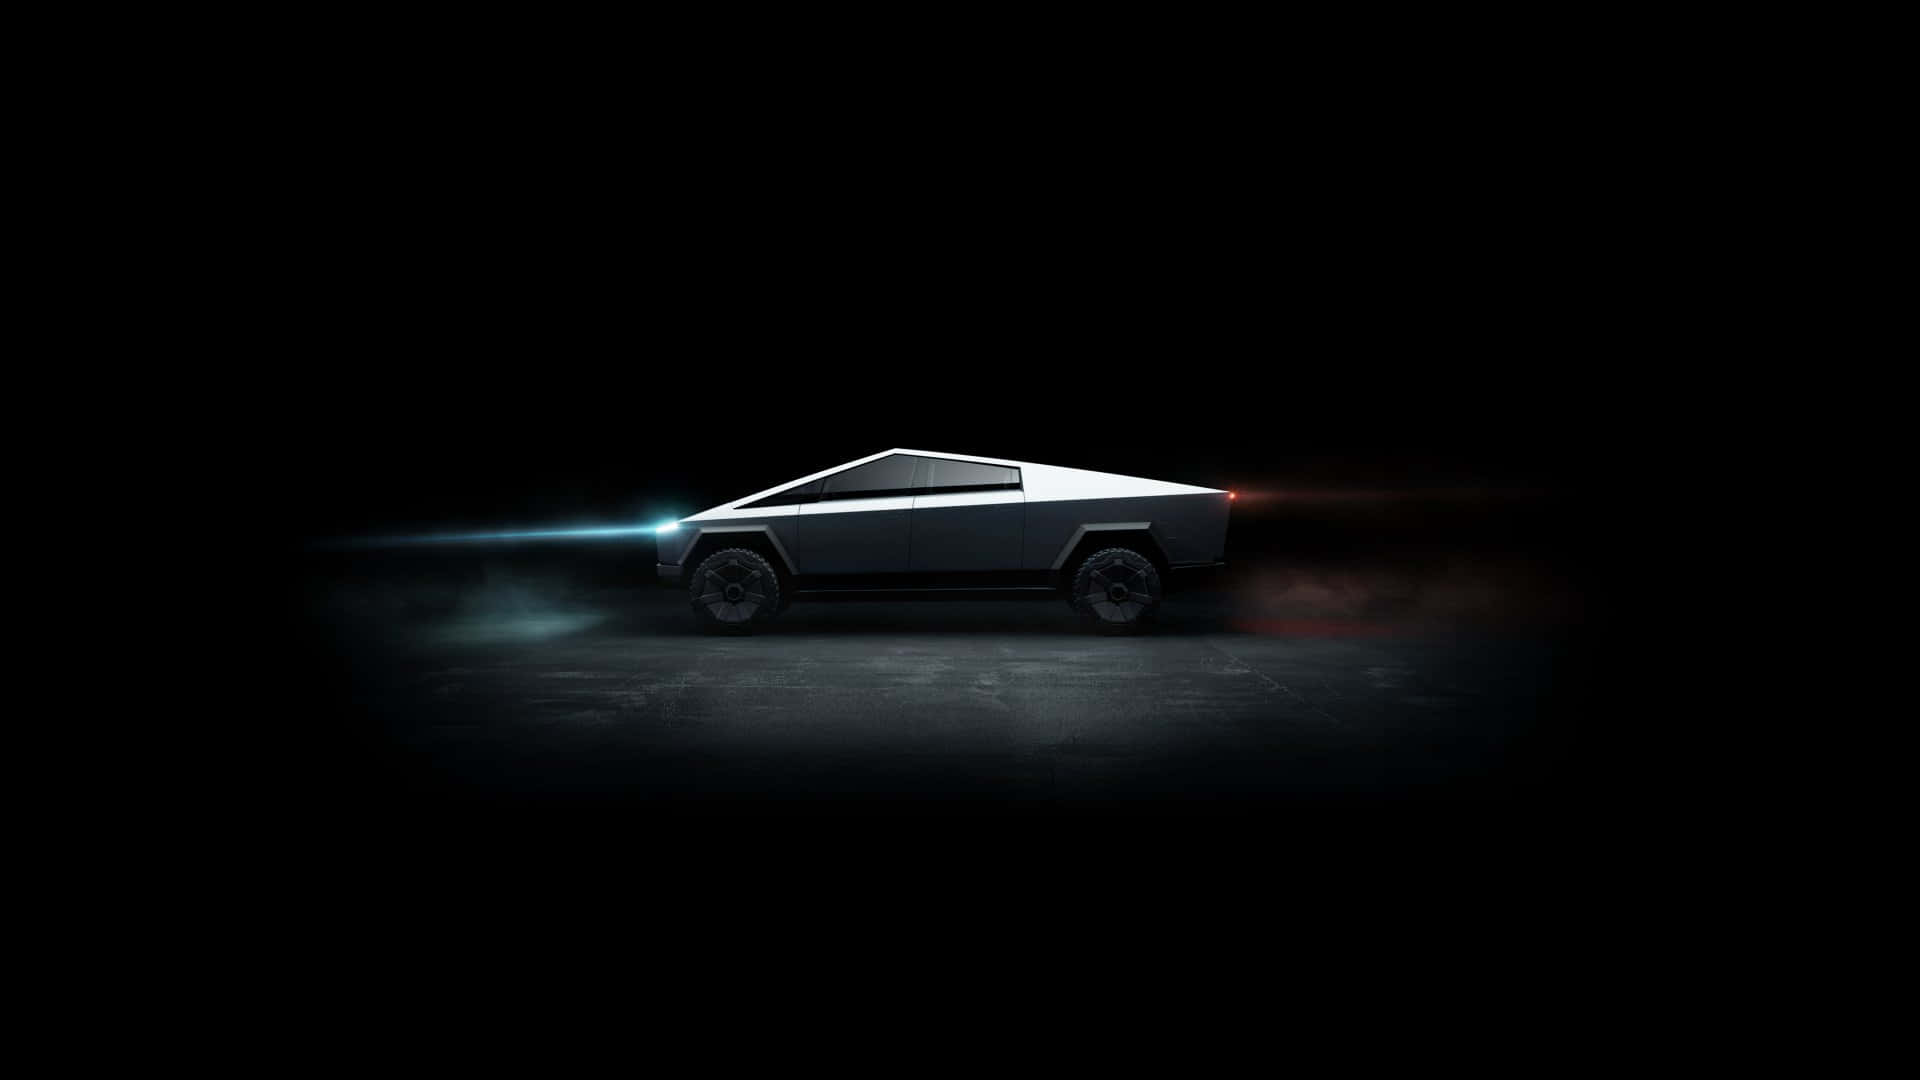 Get Ready to Take a Ride in the Stylish Tesla Cybertruck Wallpaper